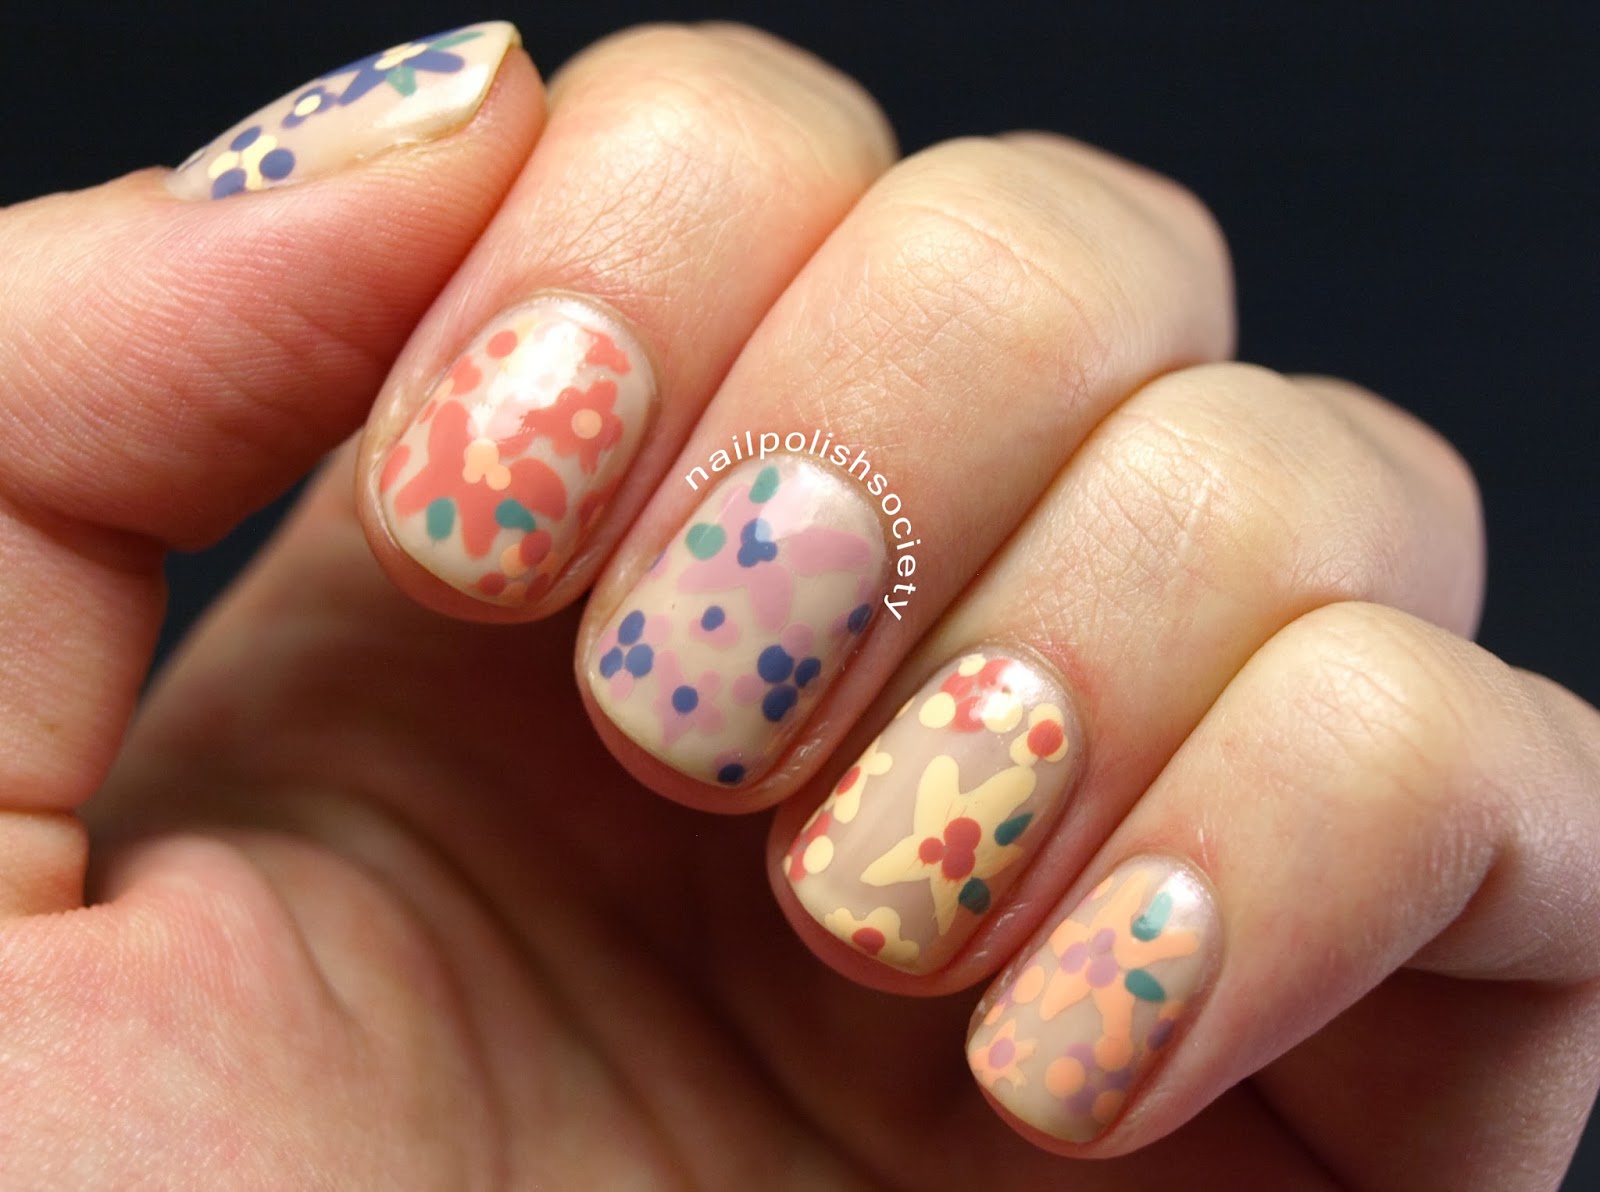 Nail Newbie: 33 Day Challenge day 7 - feature your oldest 